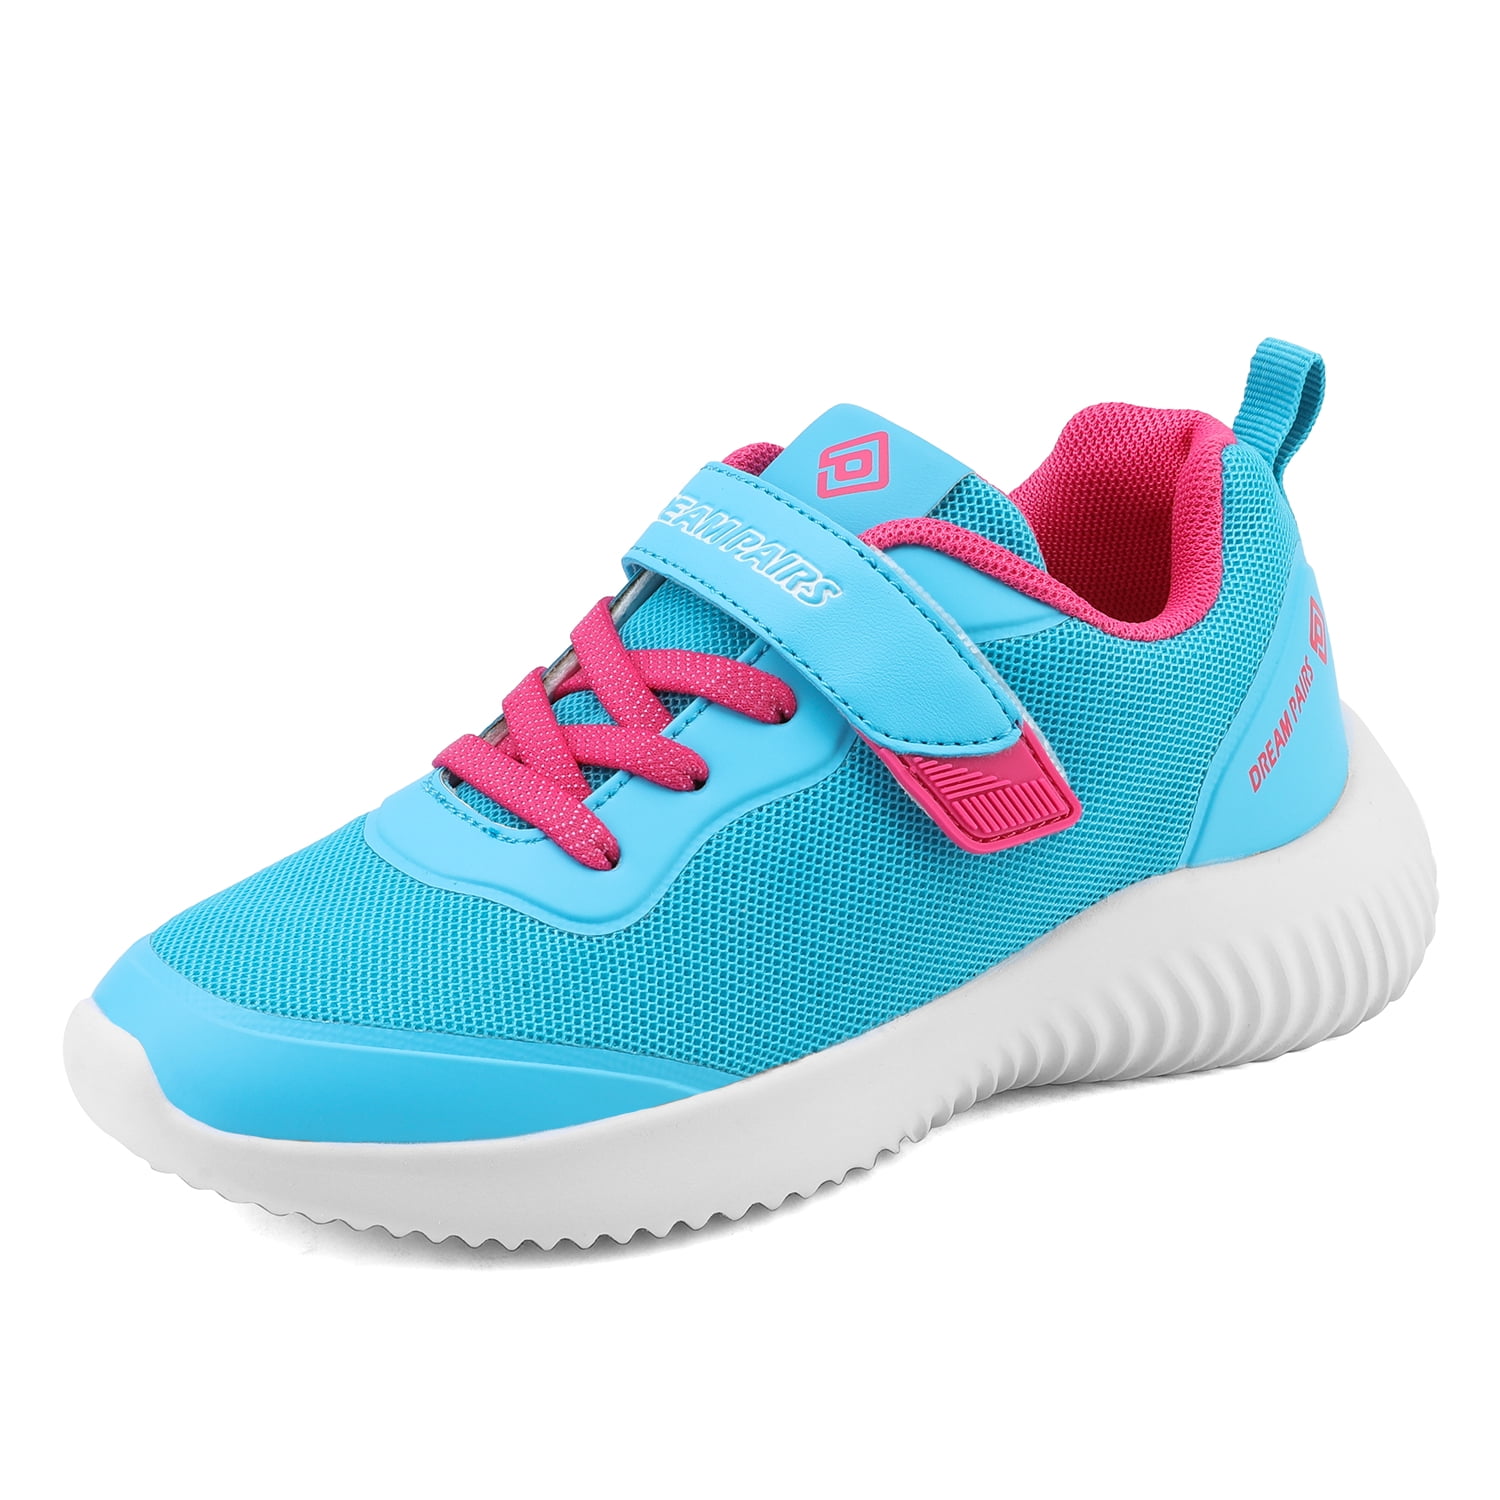 DREAM PAIRS Kid's Boys Girls Sneakers Sports Athletic Casual Walking Shoes Kids 